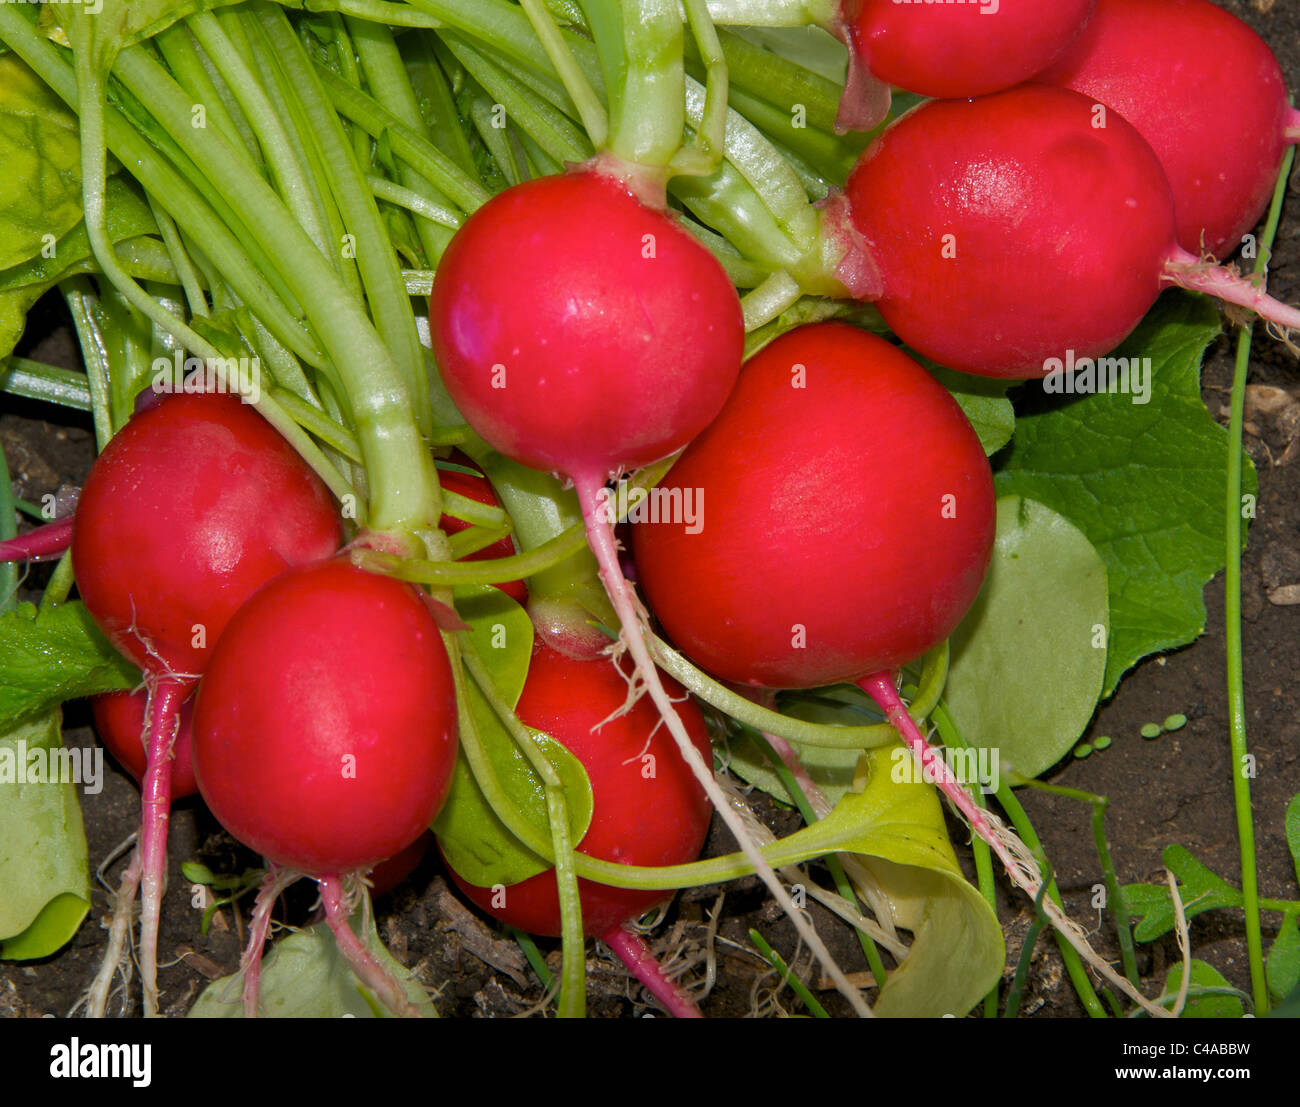 Summer salad vegetables - radishes are a colorful colourful addition. Stock Photo